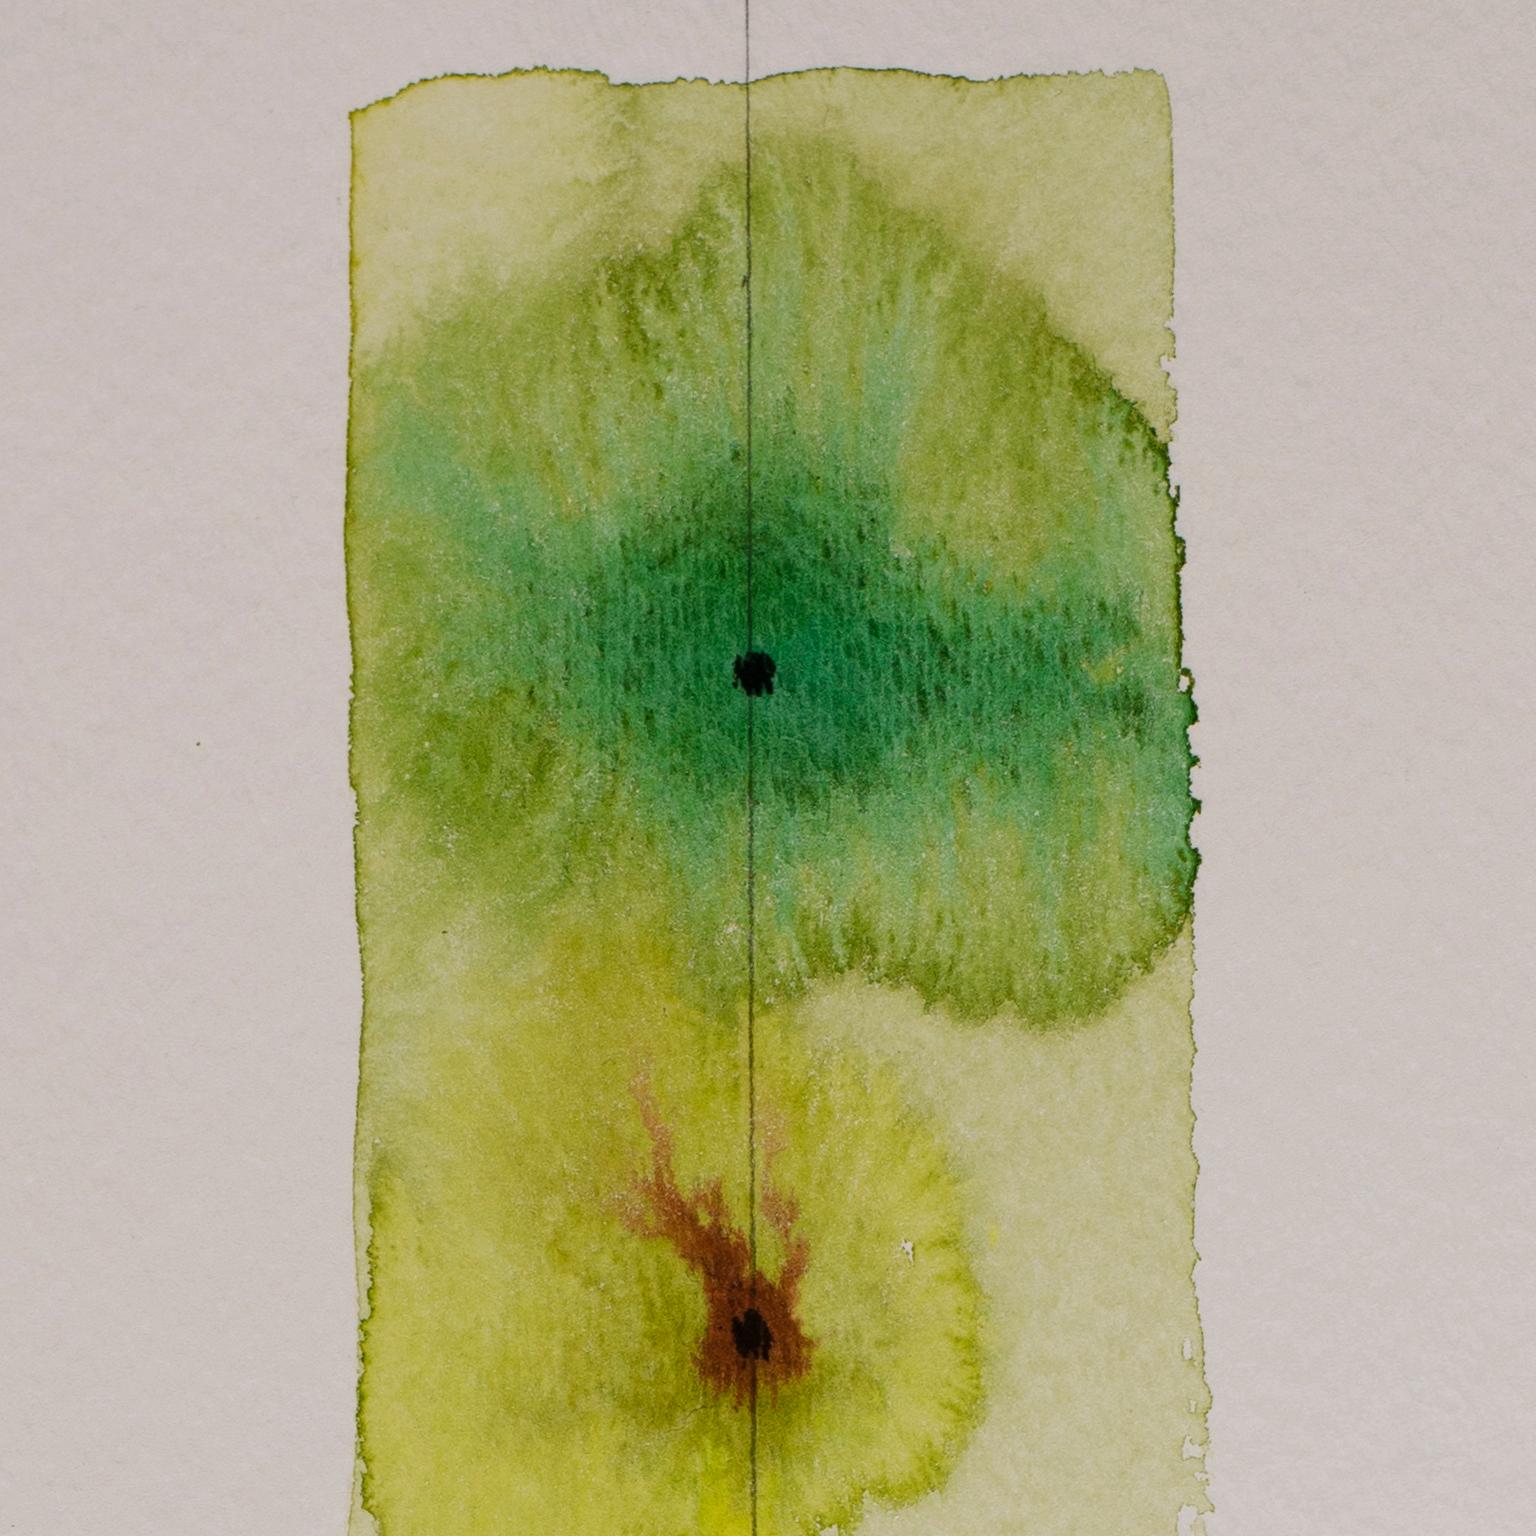 Totem 001 by Lori Fox. Green and yellow hues abstract watercolor and graphite im Angebot 2